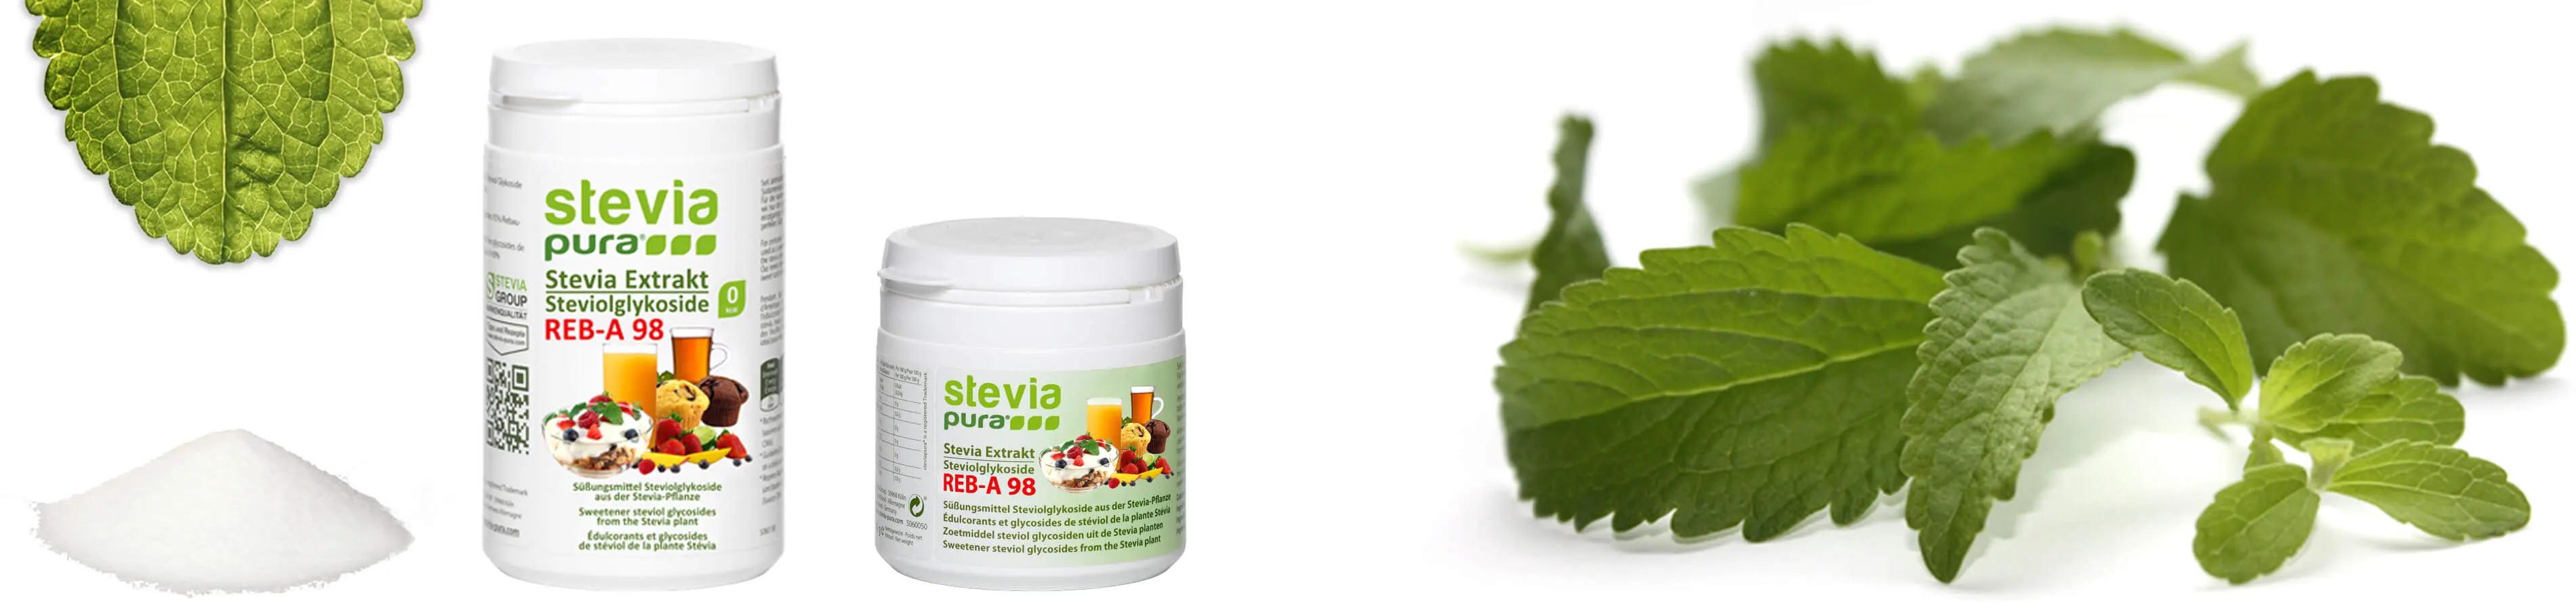 Steviol Glycosides are the sweet ingredients of the Stevia plant. Pure, unadulterated Stevia powder is used as a sugar substitute or sweetener.